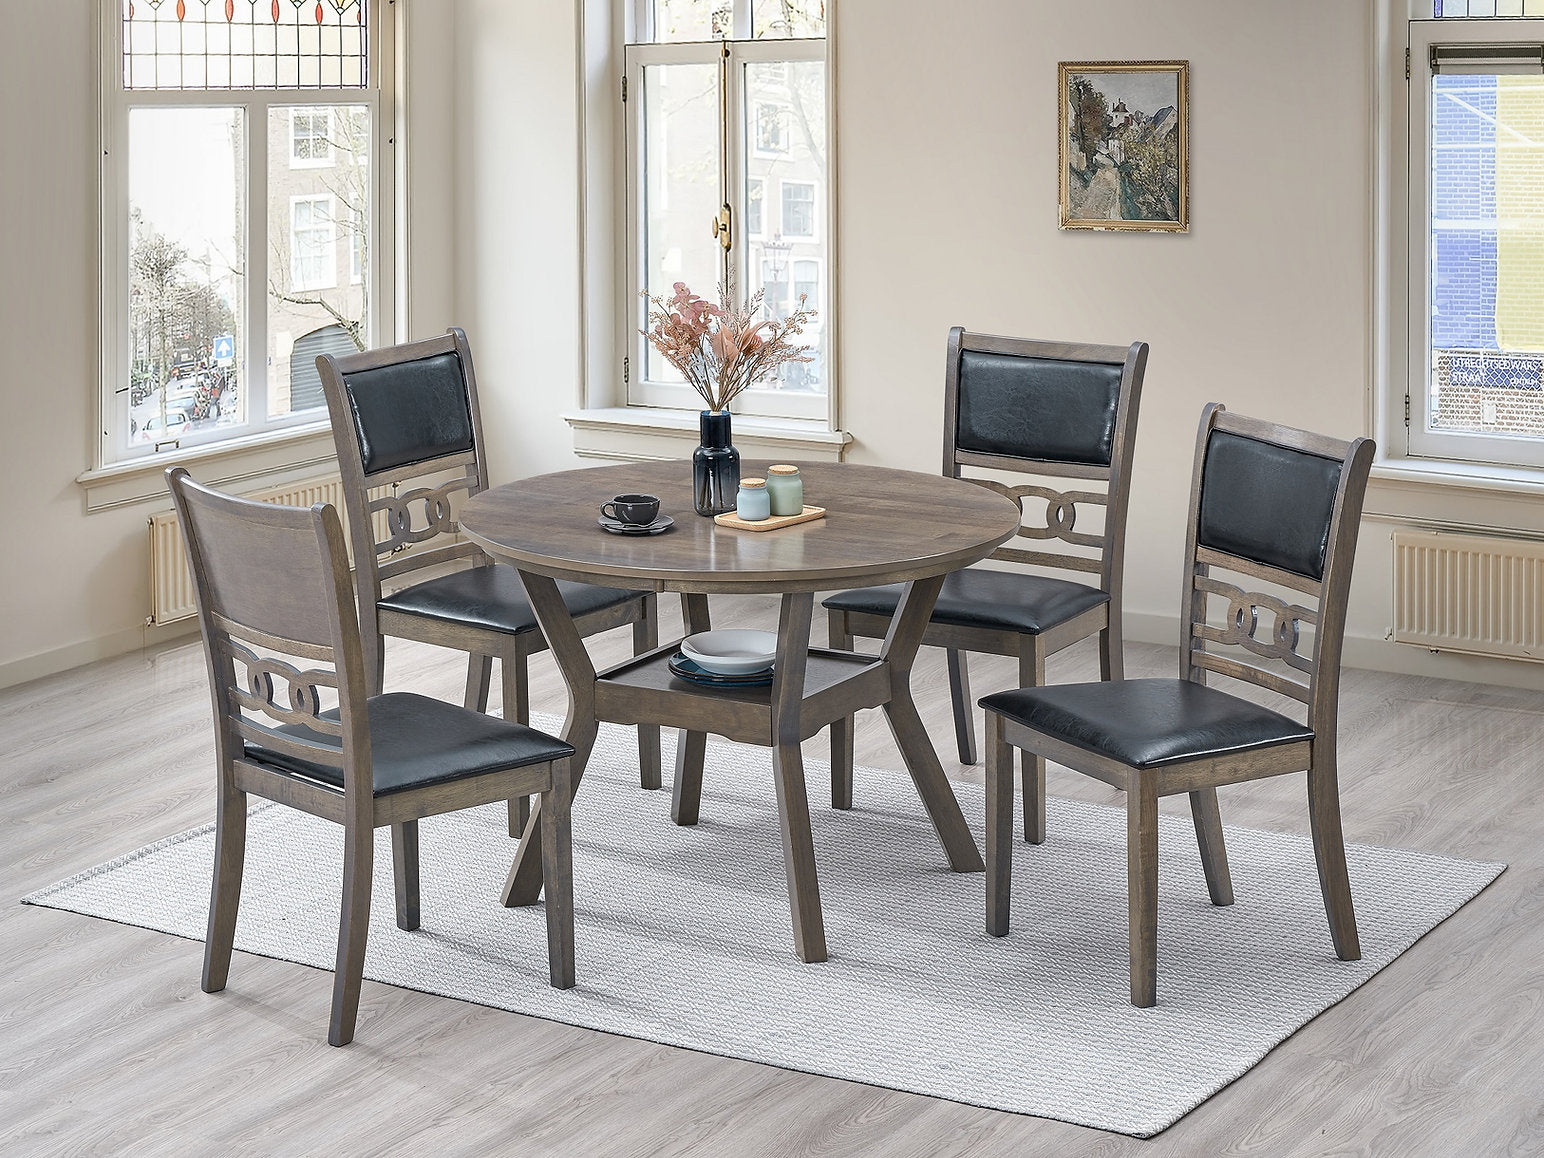 T-1079 | C-1083 - 5 Pc Dining Set - 42" Round Wooden Antique Grey Table + 4 Chairs